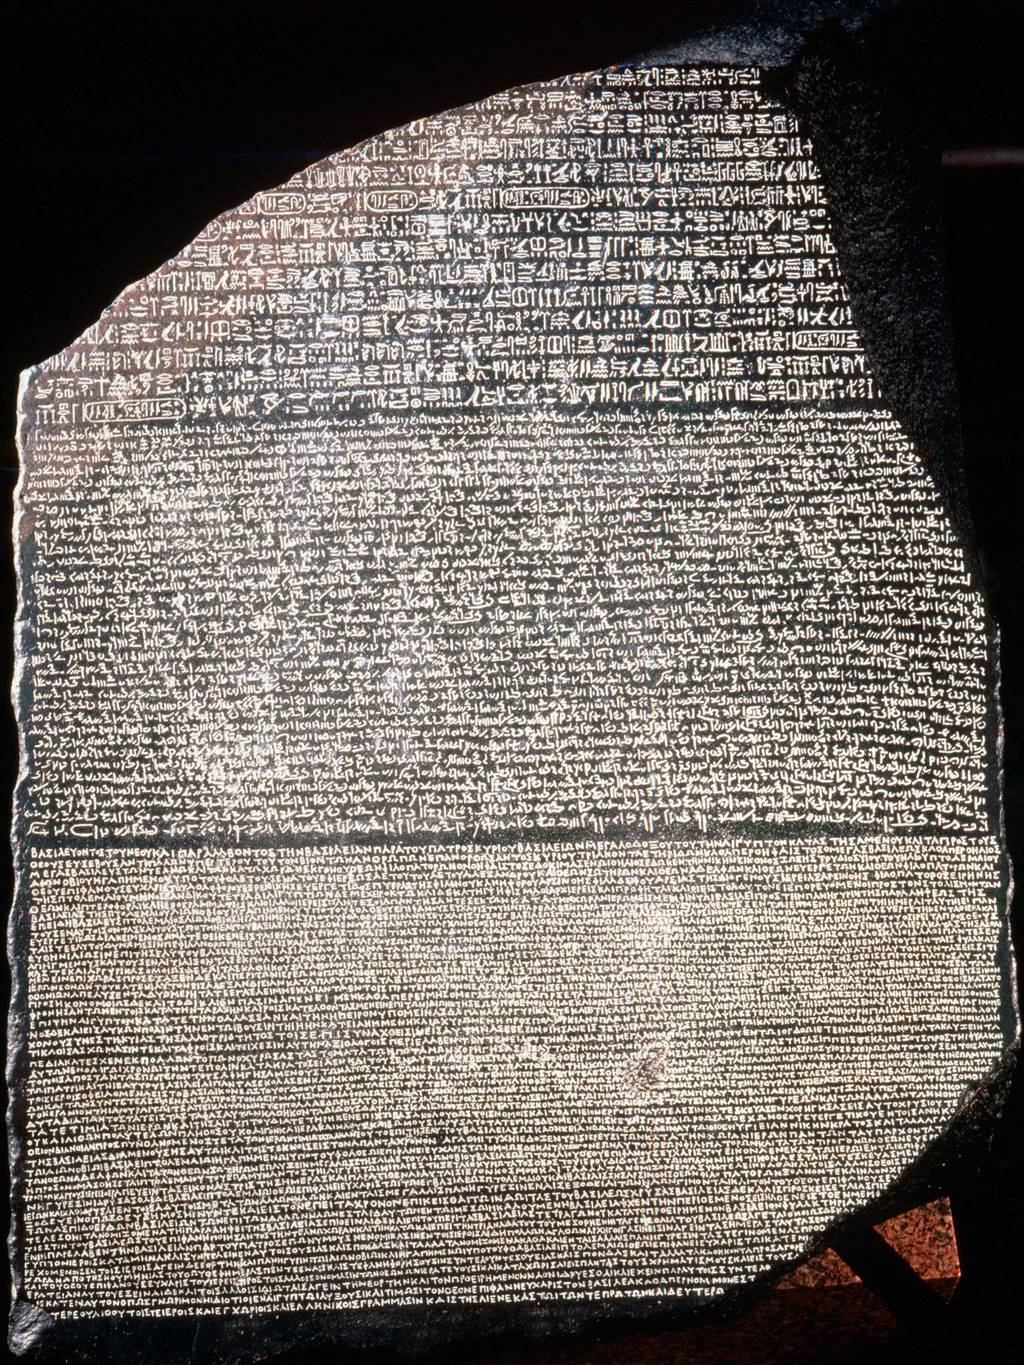 Rosetta Stone, discovered in 1799The Rosetta Stone is a basalt slab inscribed with a decree of pharaoh Ptolemy Epiphanes 205-180 BC in three languages, Greek, Hieroglyphic and Demotic script. Discovered near Rosetta in Egypt